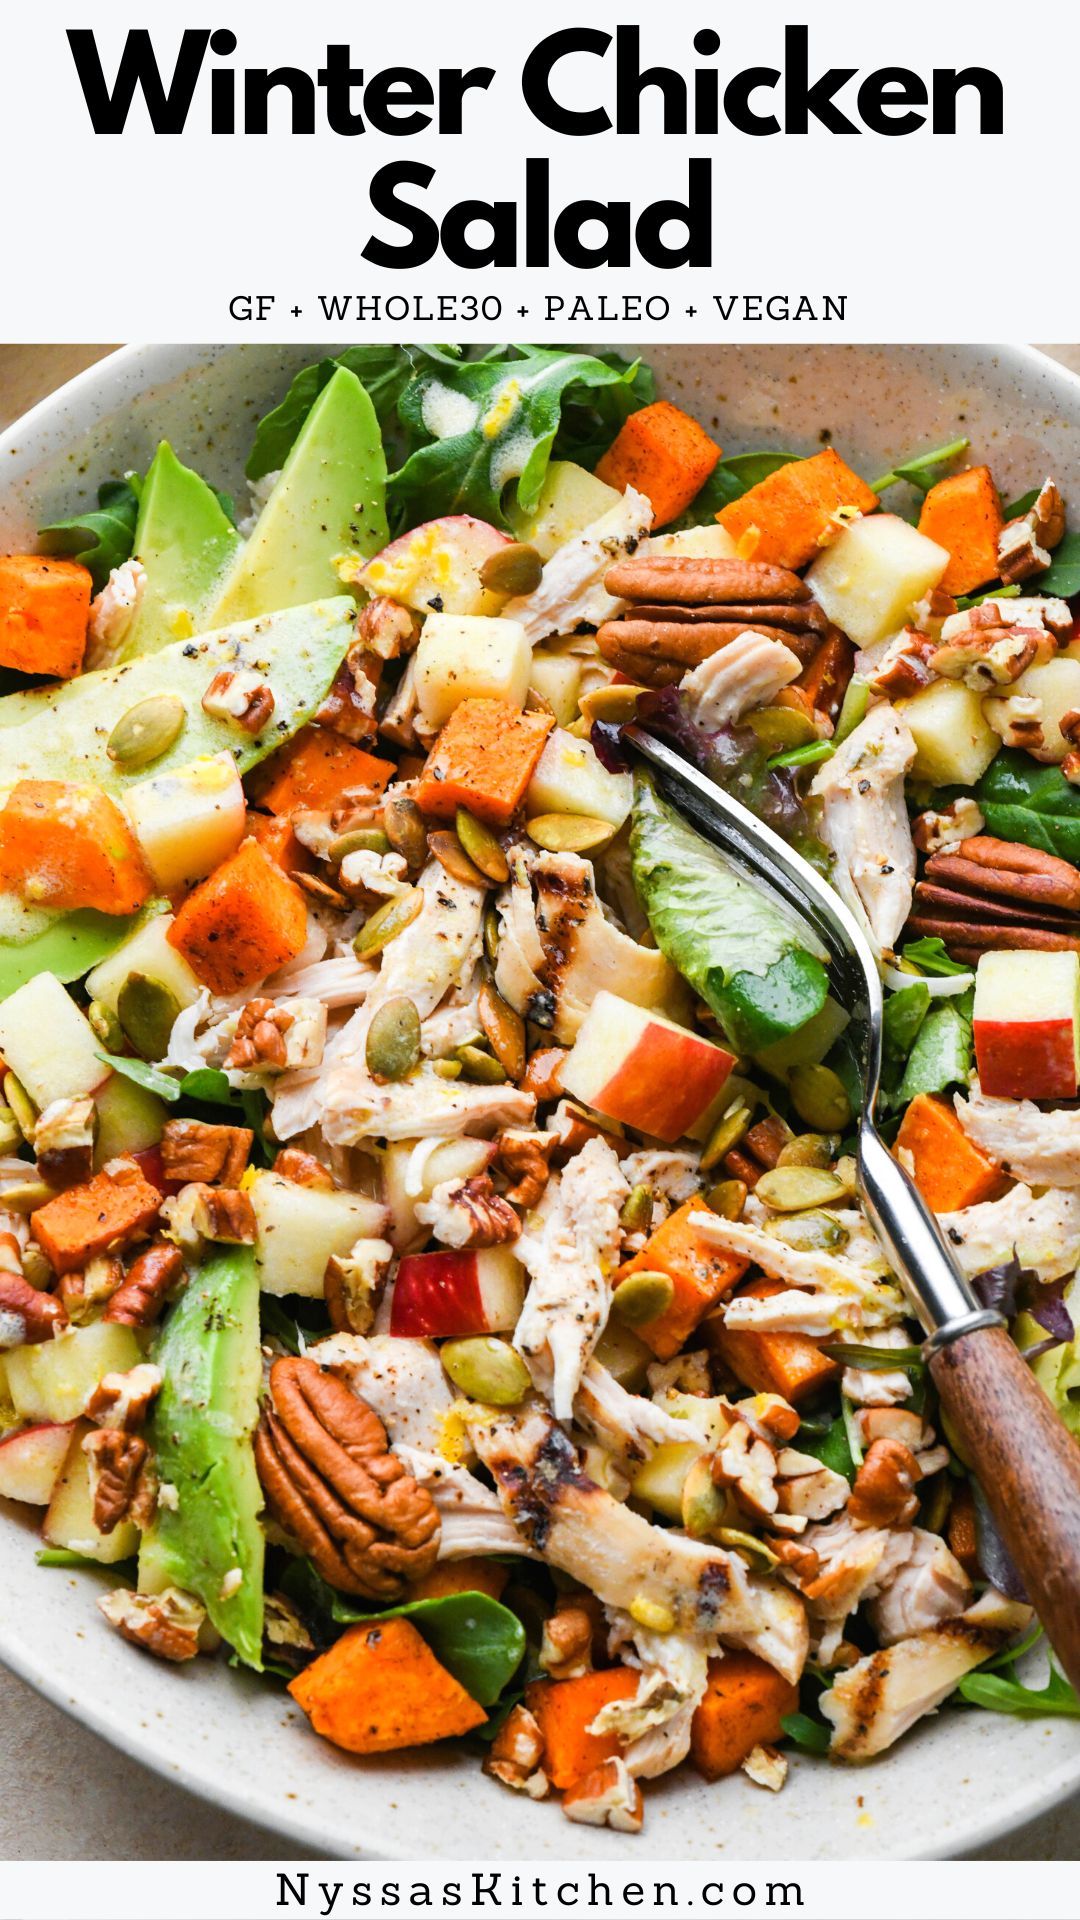 This winter chicken salad is the best salad for those moments during the colder months when you crave something fresh but hearty and filling. Made with your favorite salad greens, chicken breast, roasted sweet potatoes, apples, avocado, nuts, and a bright homemade lemony salad dressing. Easy to throw together and full of flavor and phenomenal texture! Gluten free, paleo, dairy free, & easily made Whole30 compatible.